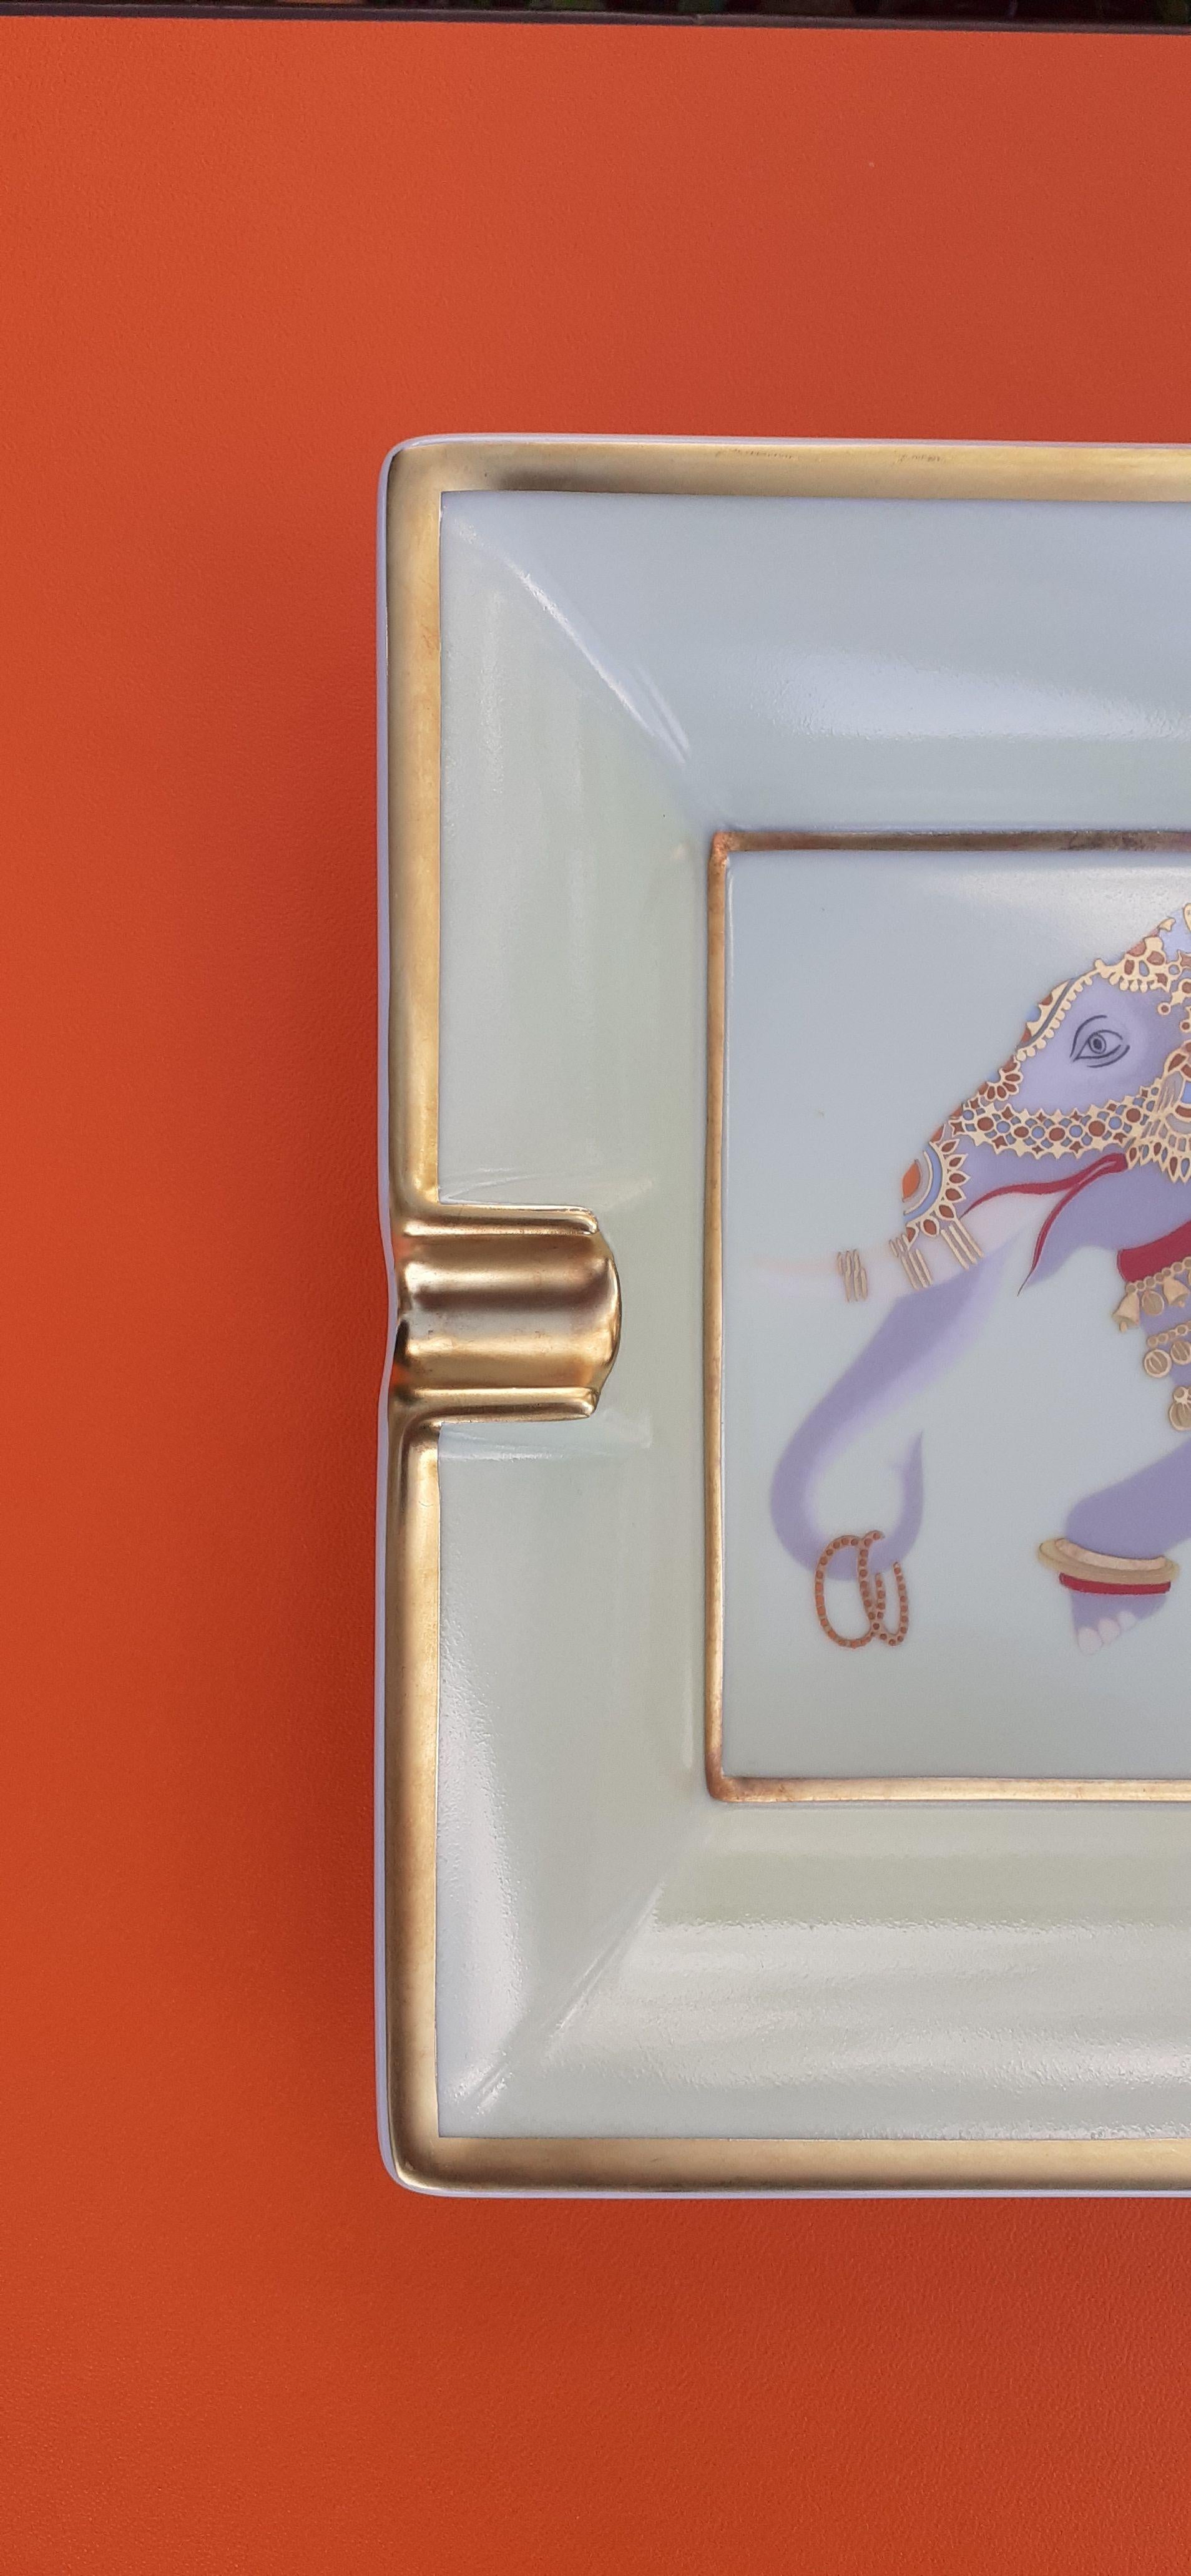 Absolutely Gorgeous Authentic Hermès Ashtray

Pattern: Elephant elephant dressed in his finery

Made in France

Made of Porcelain with Golden Edges

Bottom covered with beige Leather

Colorways: Pale Green (same as 1st photo), Orange, Grey

The